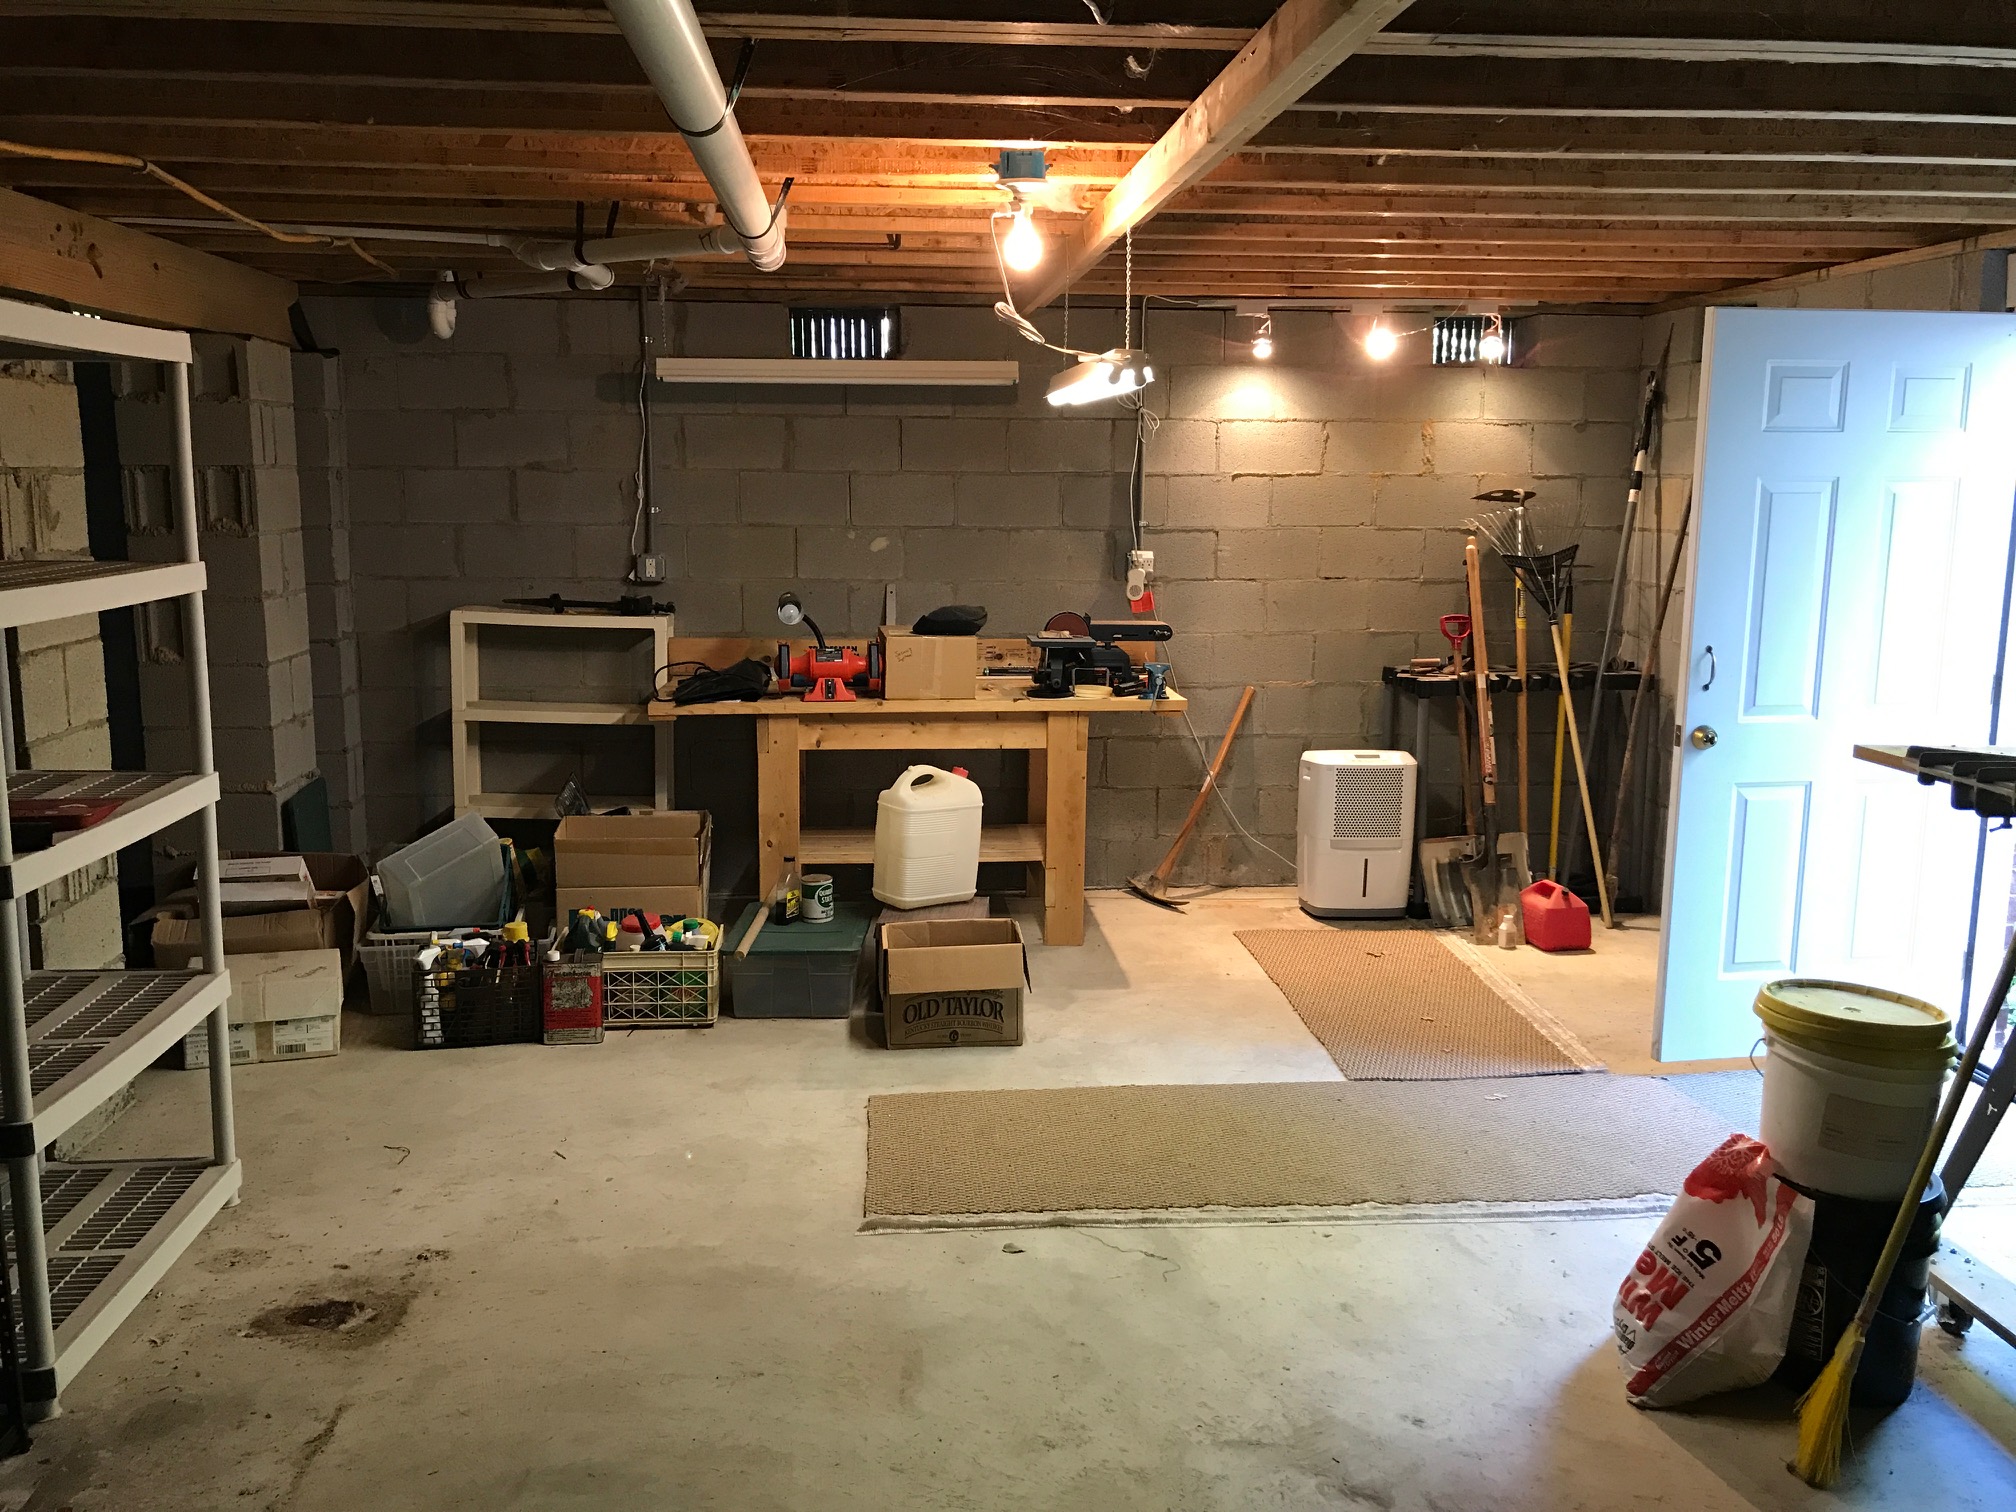 Questions About A Tall Crawl Space, Can A Crawl Space Be Turned Into Basement